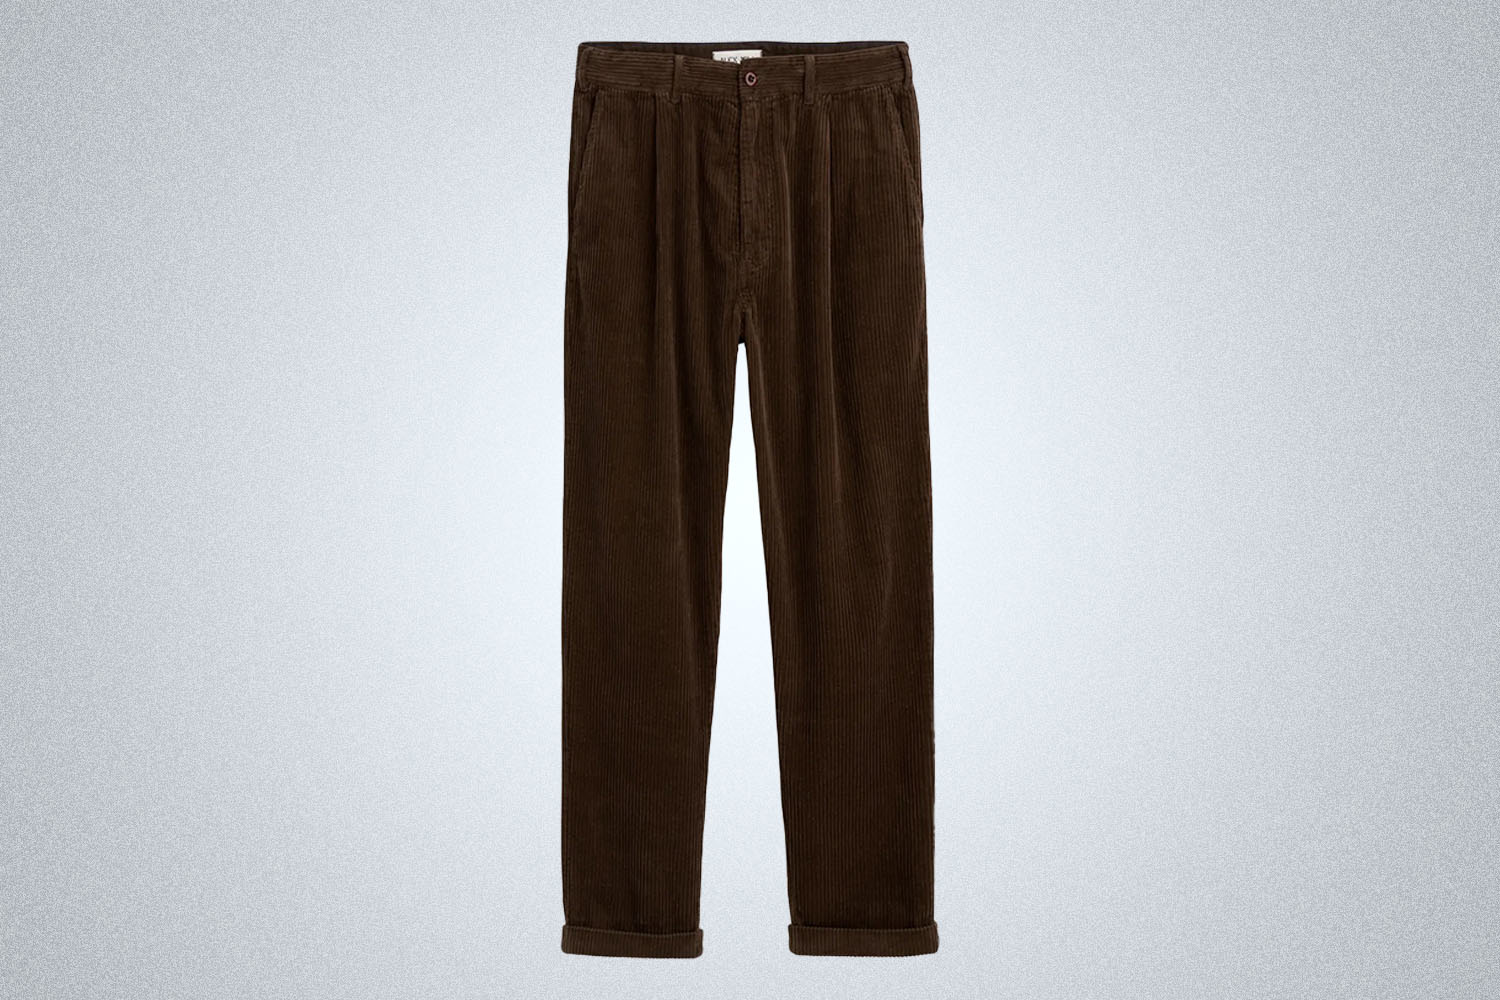 a pair of brown Alex Mill corduroy pants on a grey background